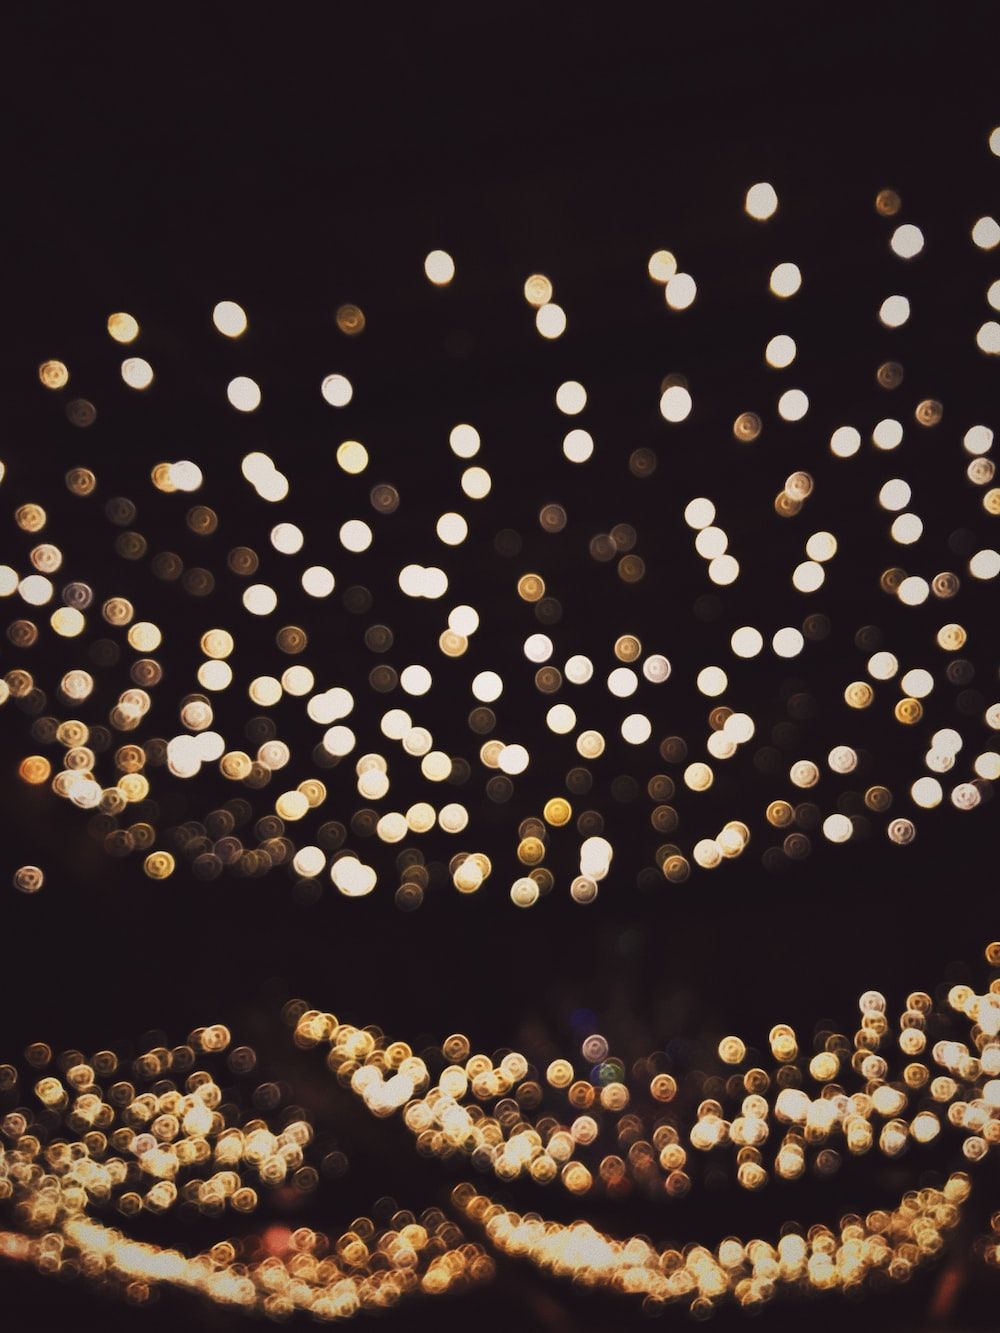 Fairy Lights Picture. Download